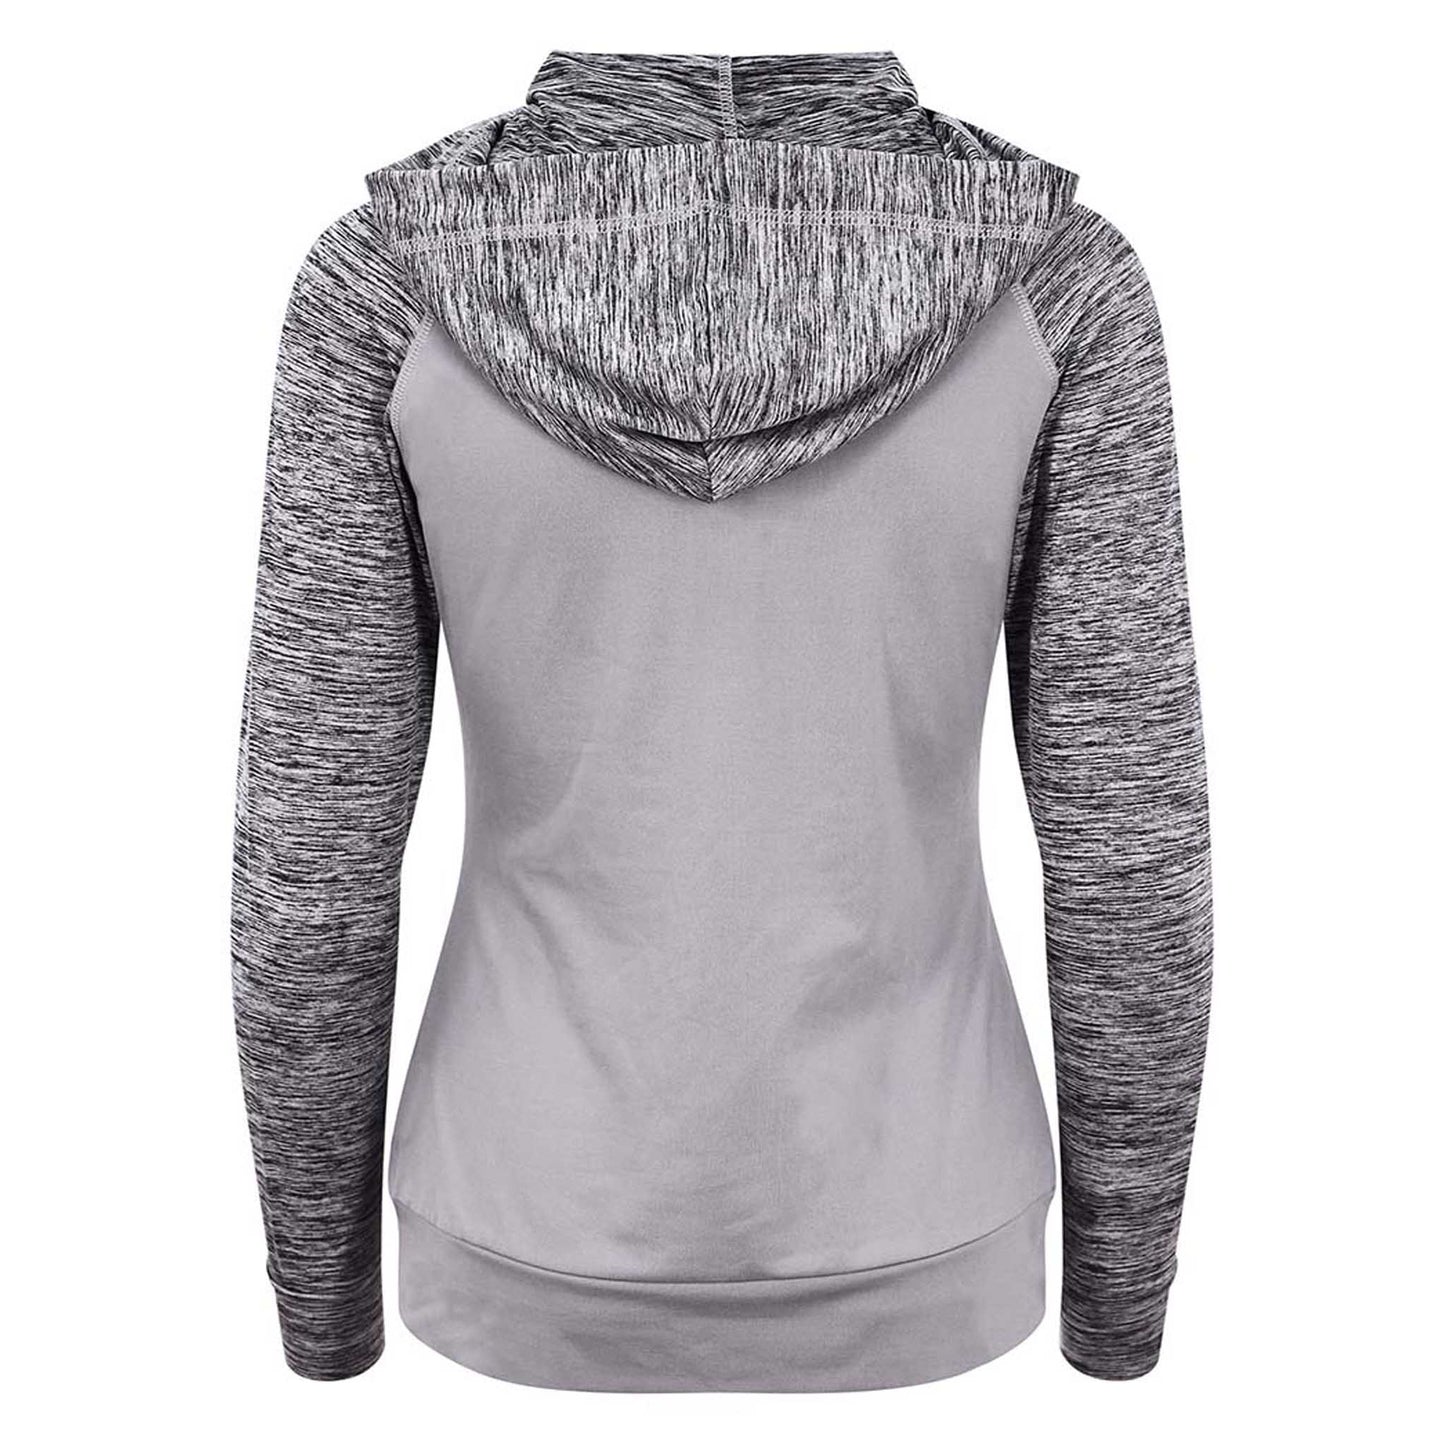 LILY - Ladies Contrast, Hooded, Full Zipped Jacket. - Grey